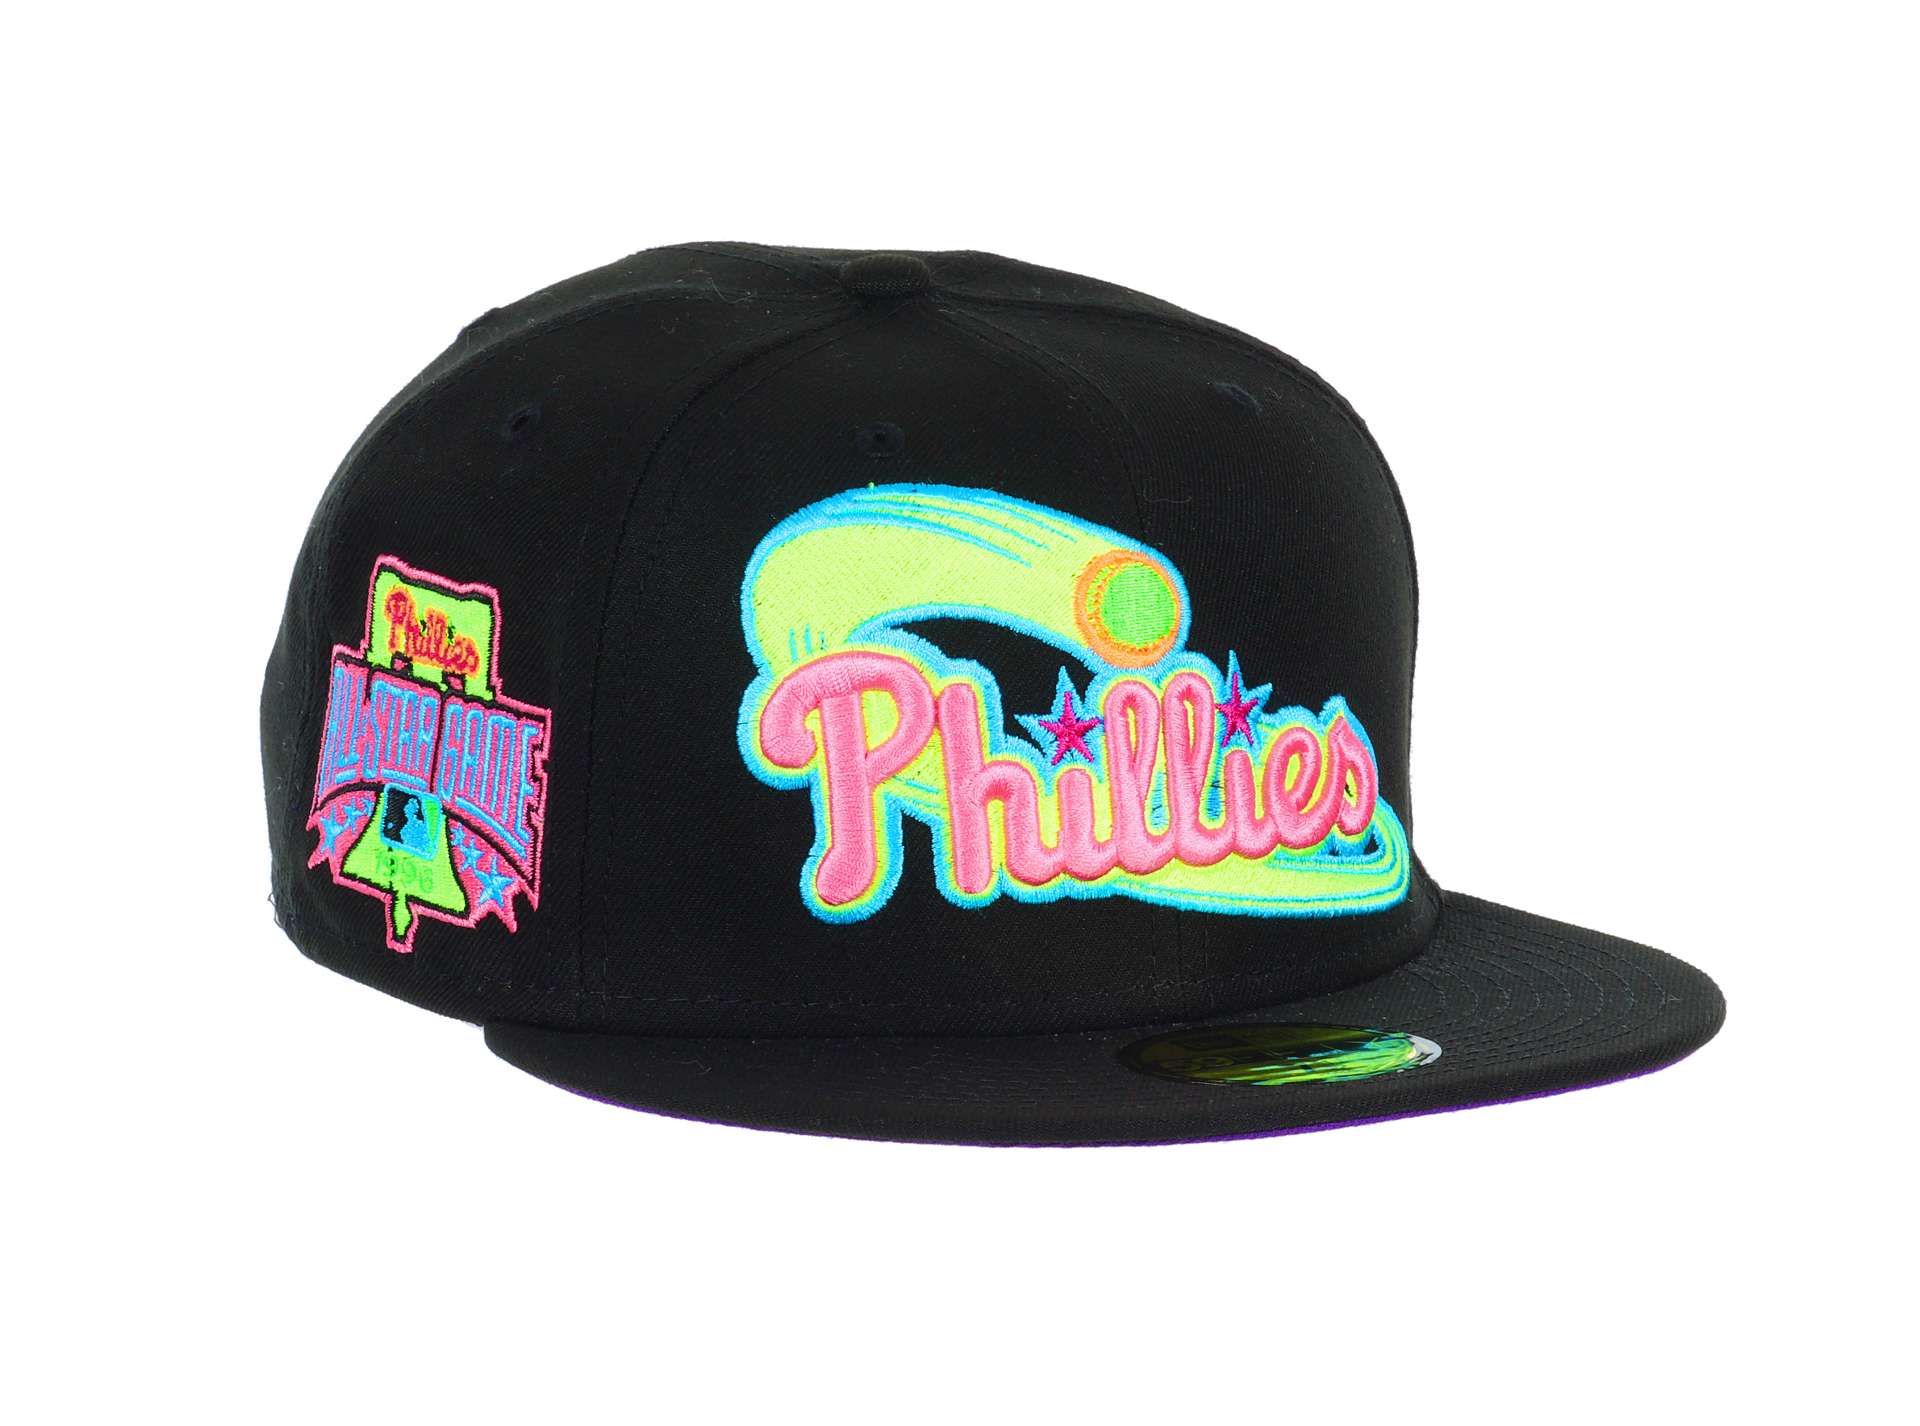 Philadelphia Phillies MLB Cooperstown All-Star Game 1996 Sidepatch Black Neon 59Fifty Basecap New Era